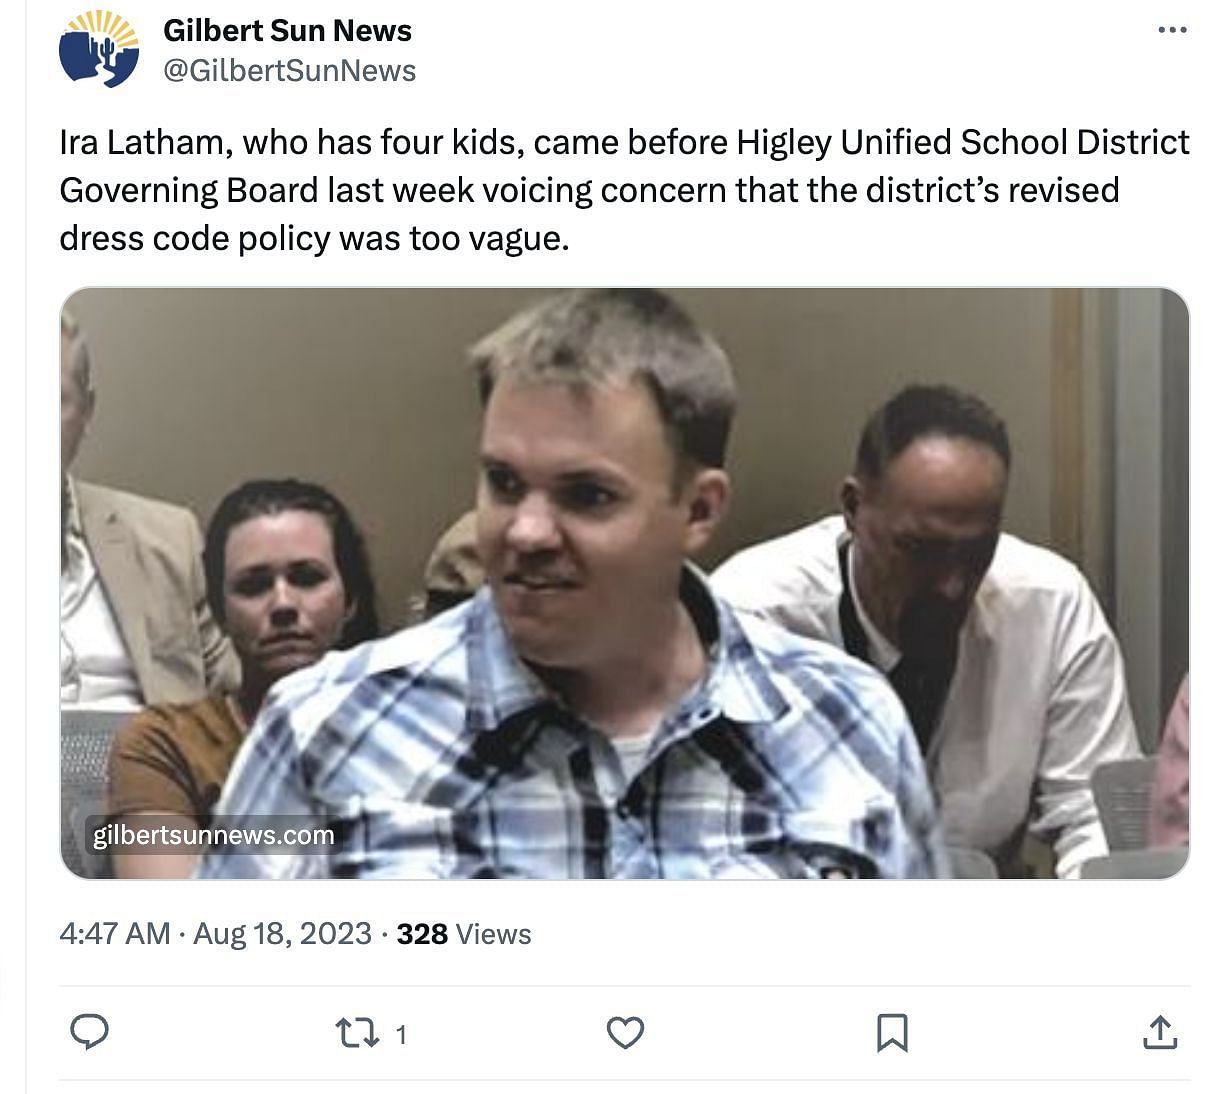 Latham, father of four, strips down at a school board meeting to protest about the new dress code policy. (Image via Twitter)